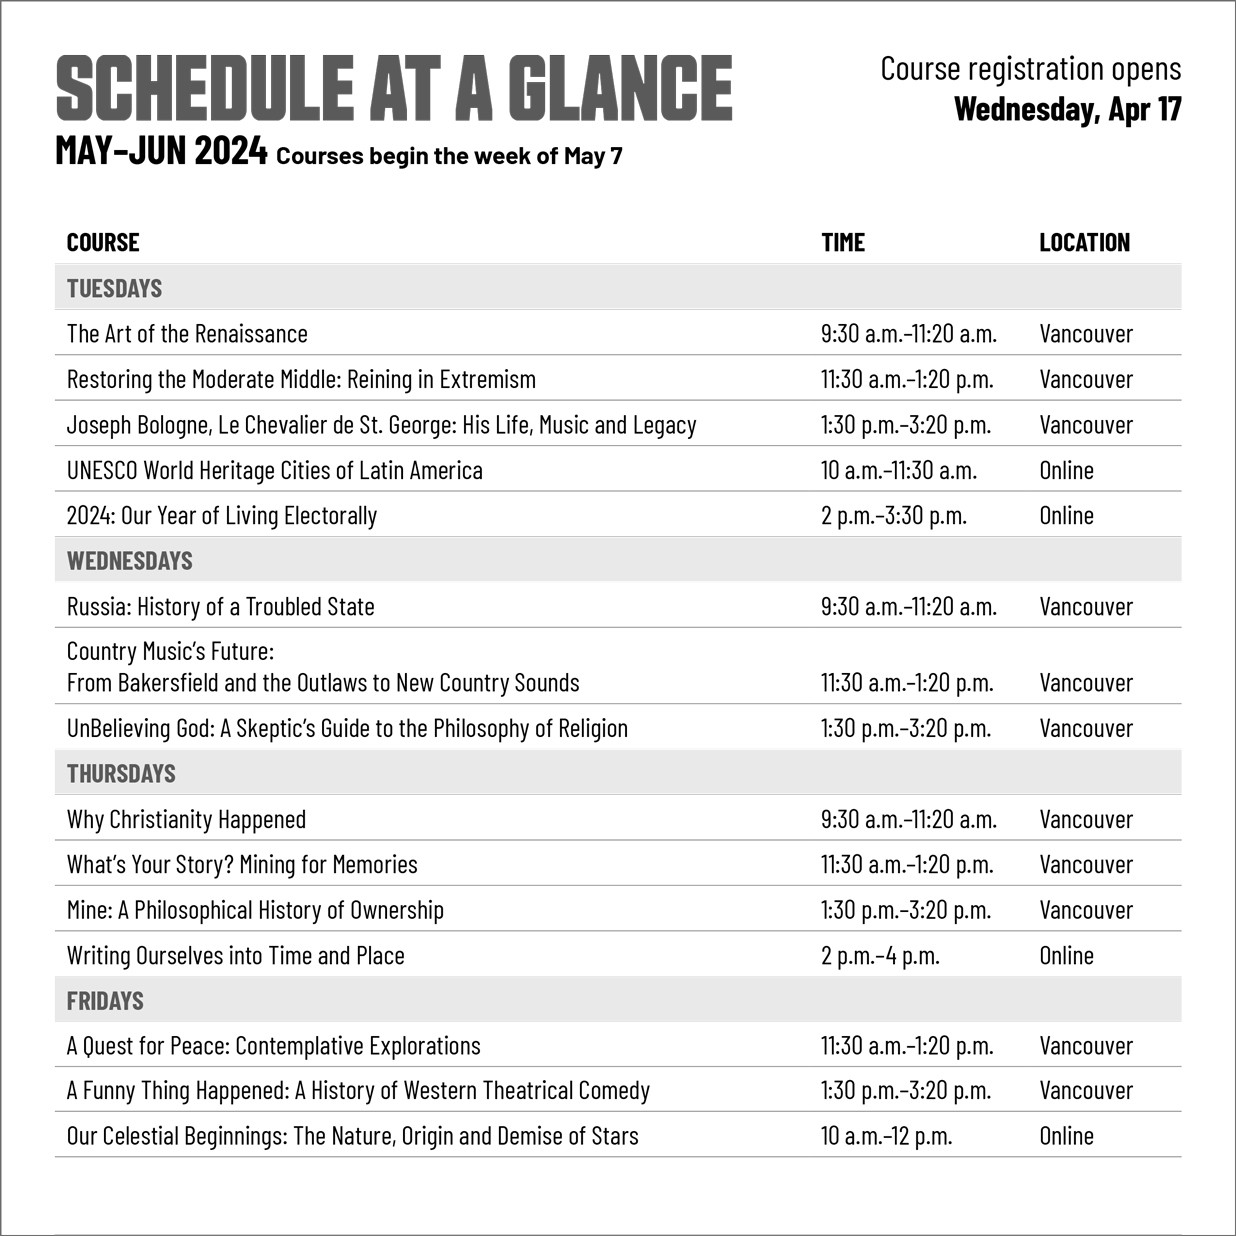 Schedule at a glance cover